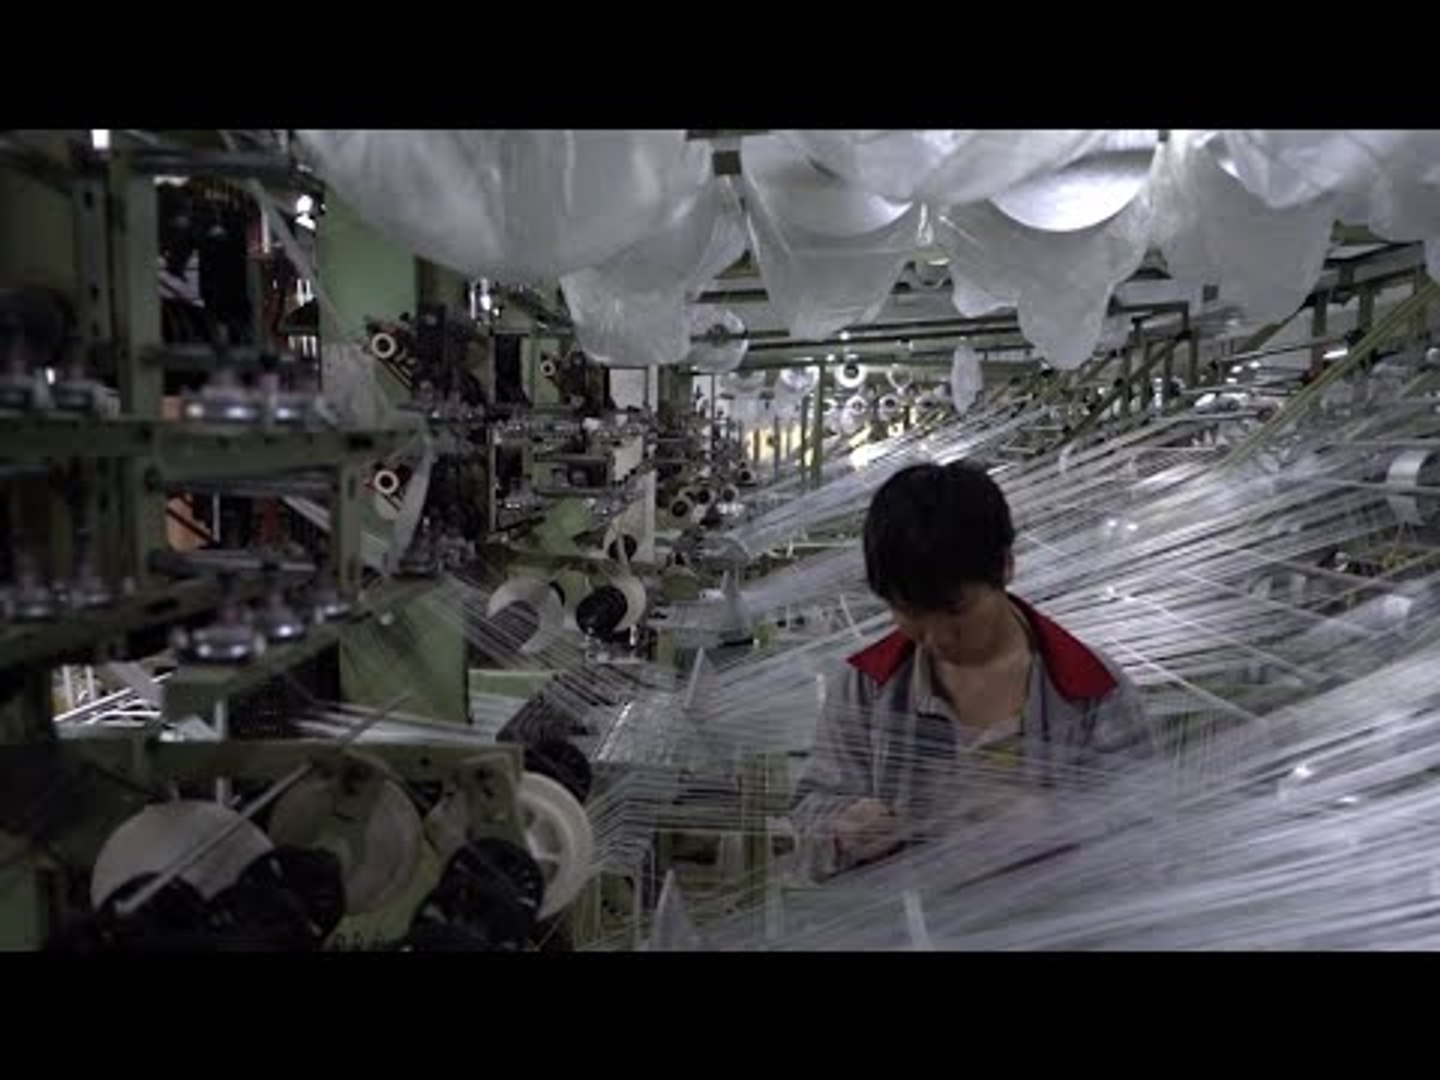 China makes the world's bras and pants from this one town